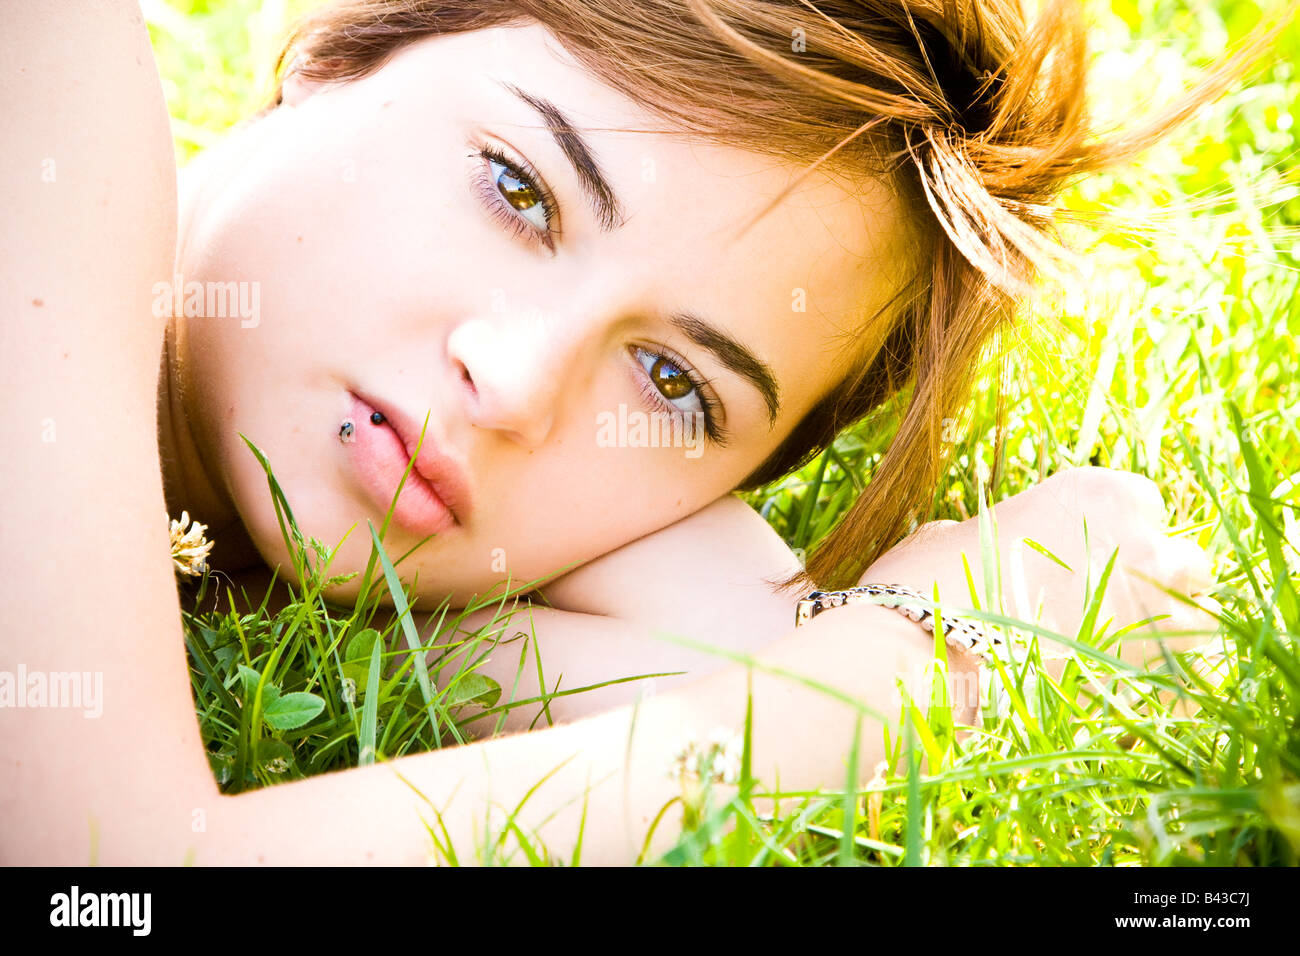 Young beautiful blond staring at camera on the grass Stock Photo